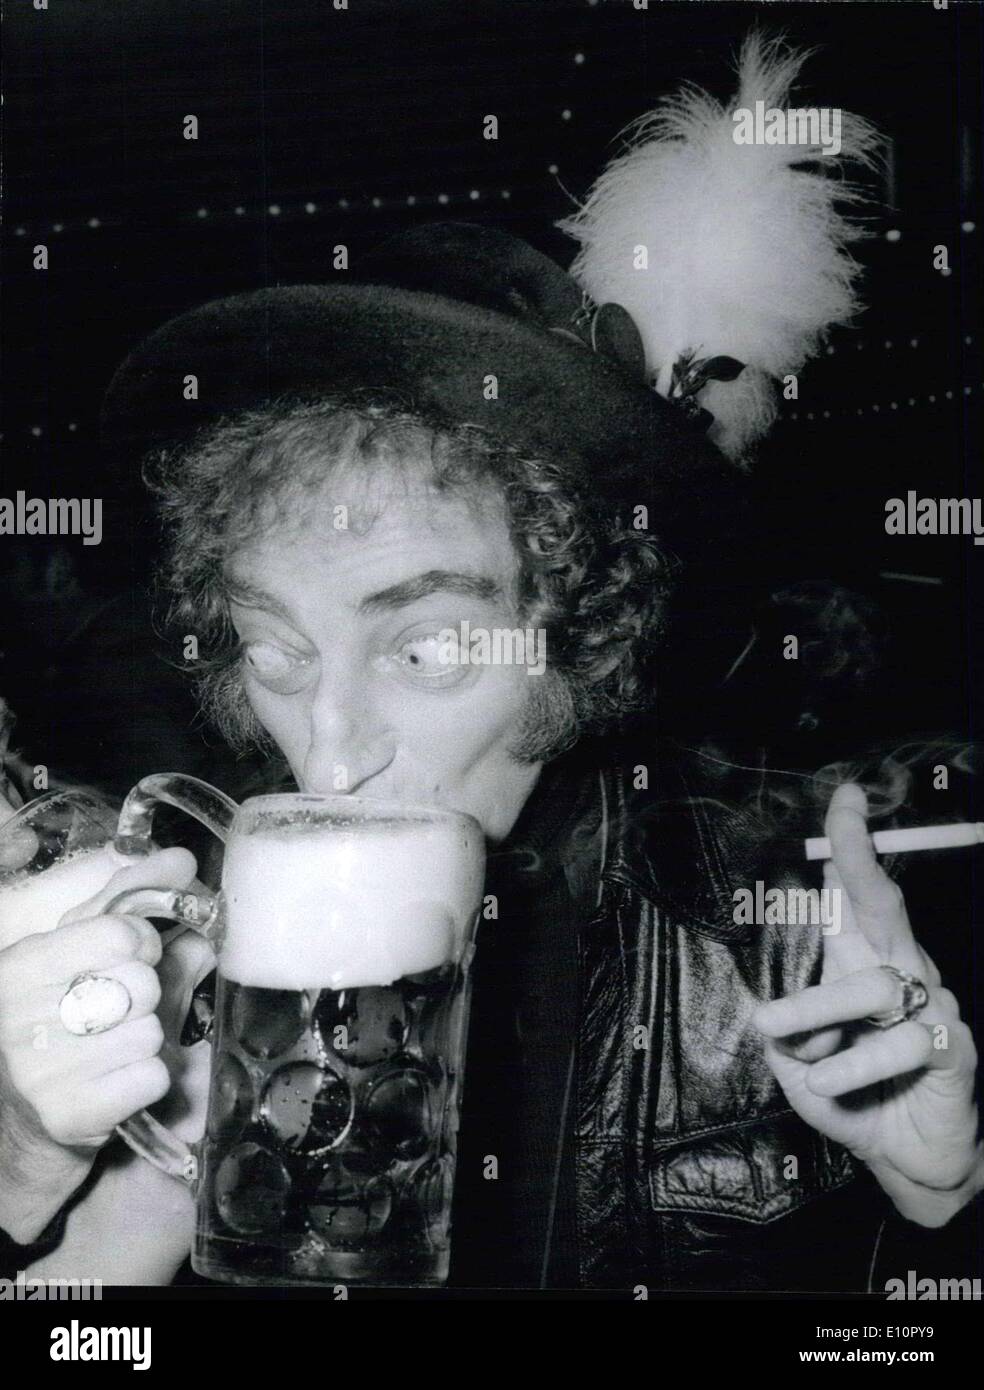 Oct. 03, 1973 - Marty Feldman visits Munich's Octoberfest 1973: The famous British comedian and well-known entertainer who is just about to start his first tour through Germany on Oct. 5, 1973 in Munch, paid his vist to the big beer-festival, too. He evidently enjoyed the Bavarian atmosphere of this fun-fair and had his way with brezels, beer and all the other kind of attractions. Stock Photo